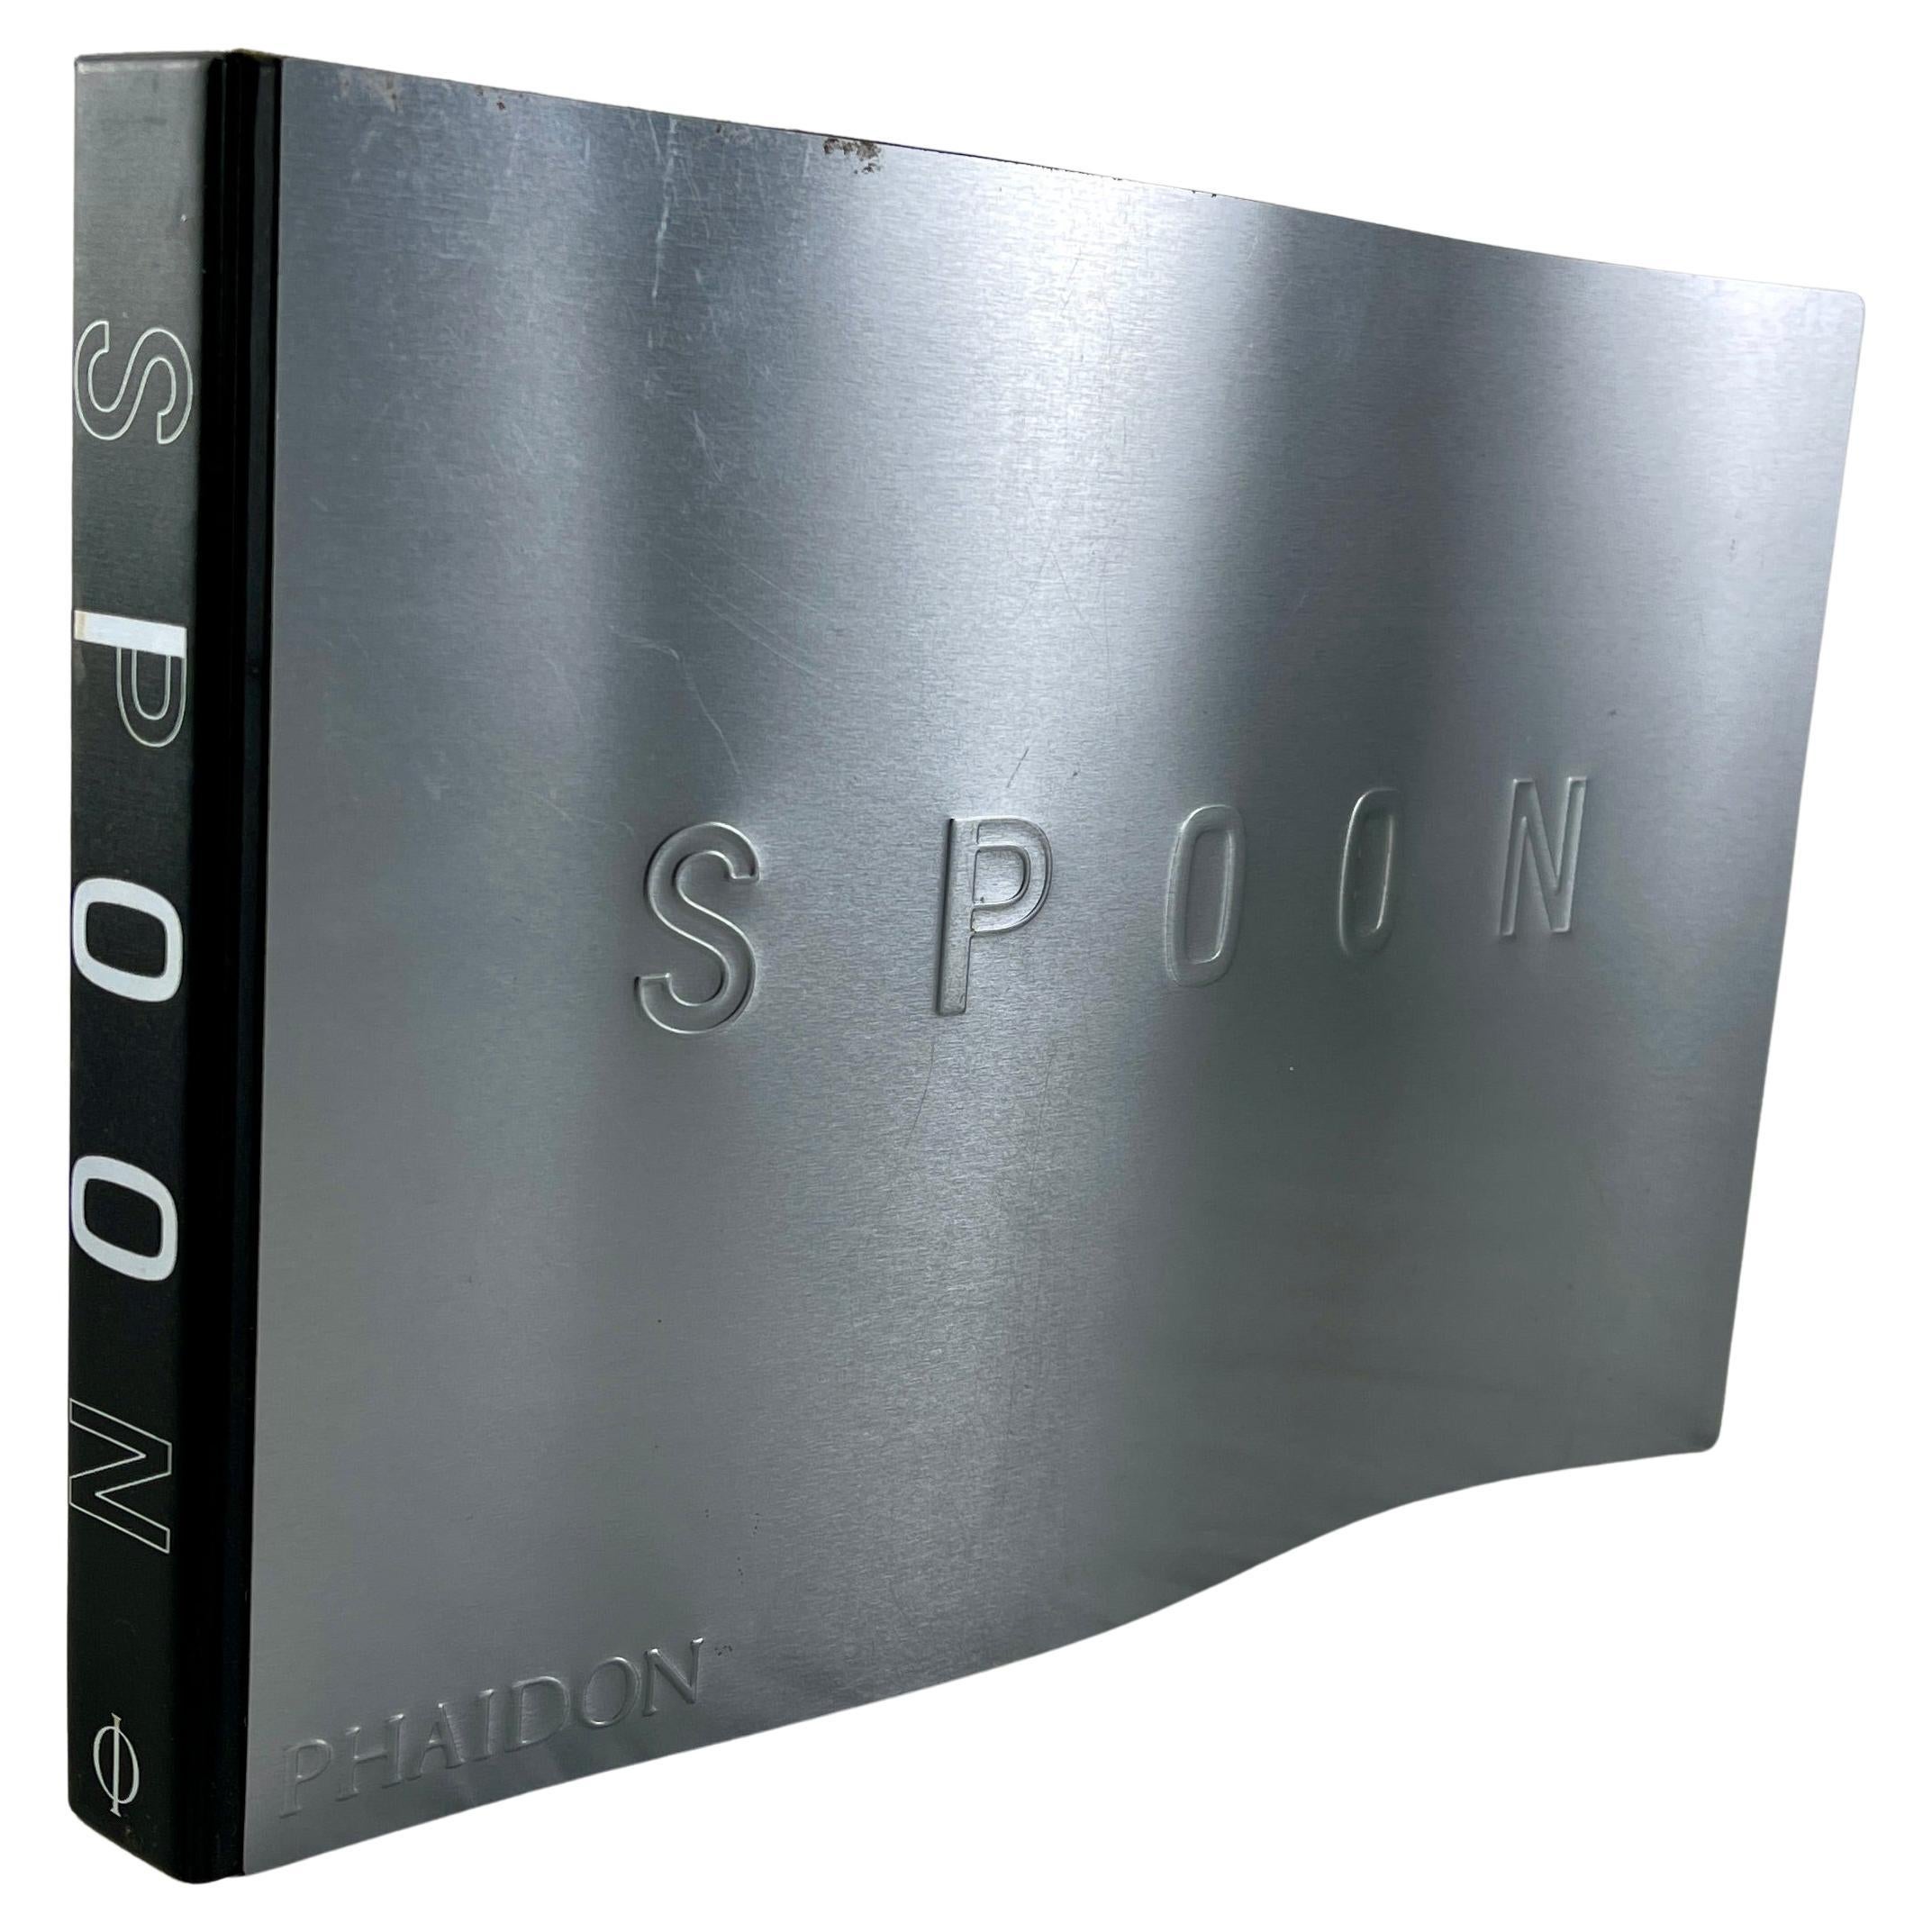 “Spoon” Industrial Design Steel Covered Book, Phaidon Press – 1st Edition For Sale